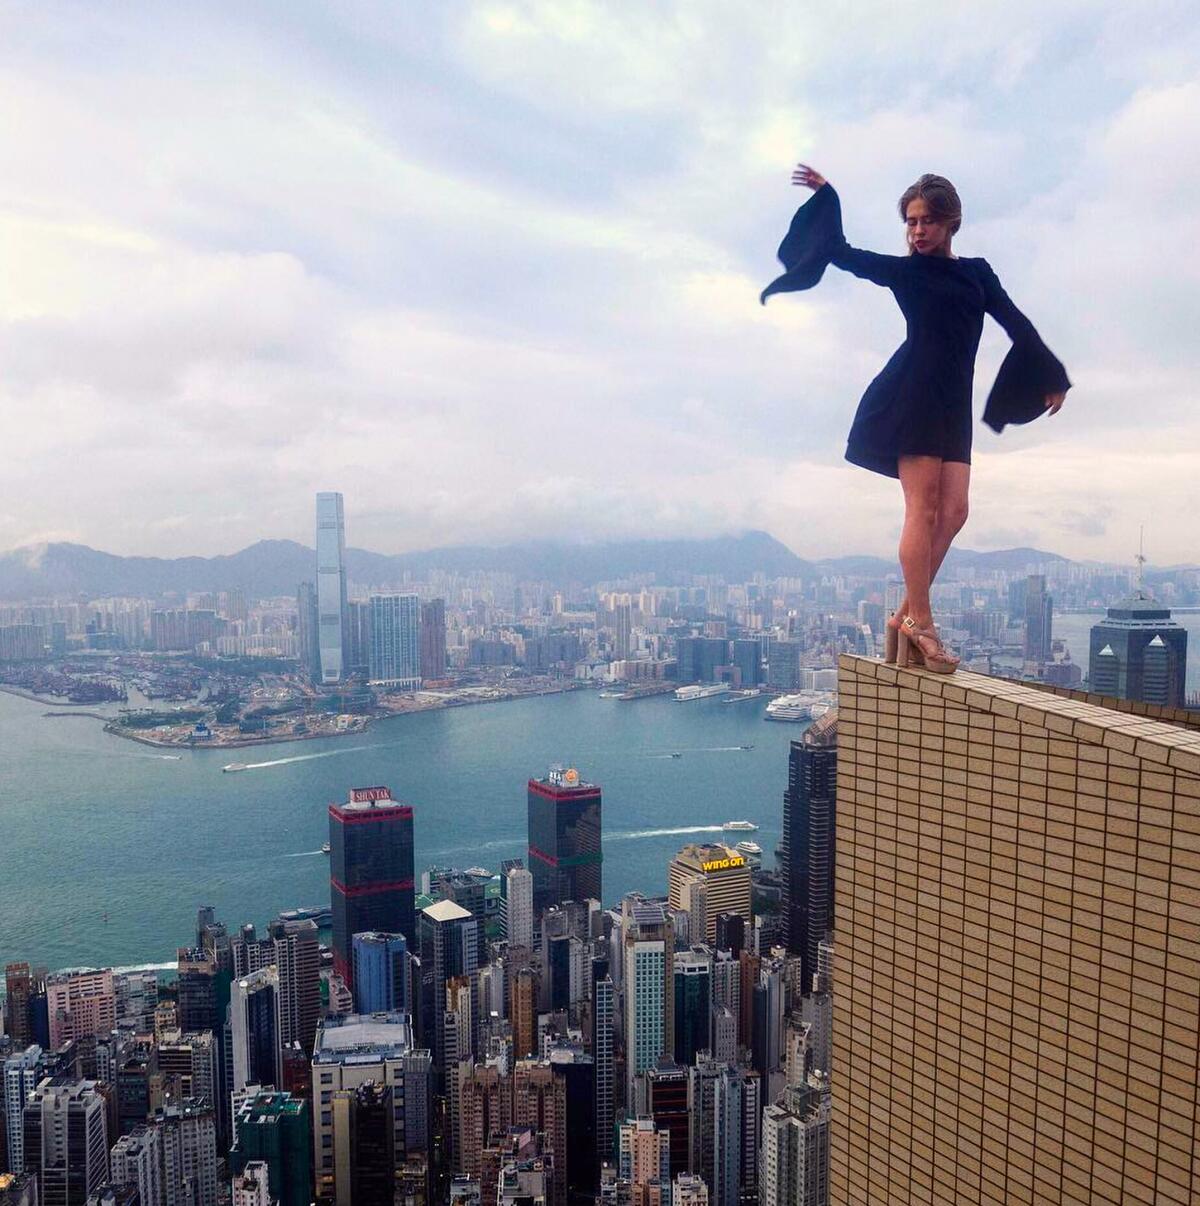 A woman in high heels and a black dress poses on the ledge of a high building.